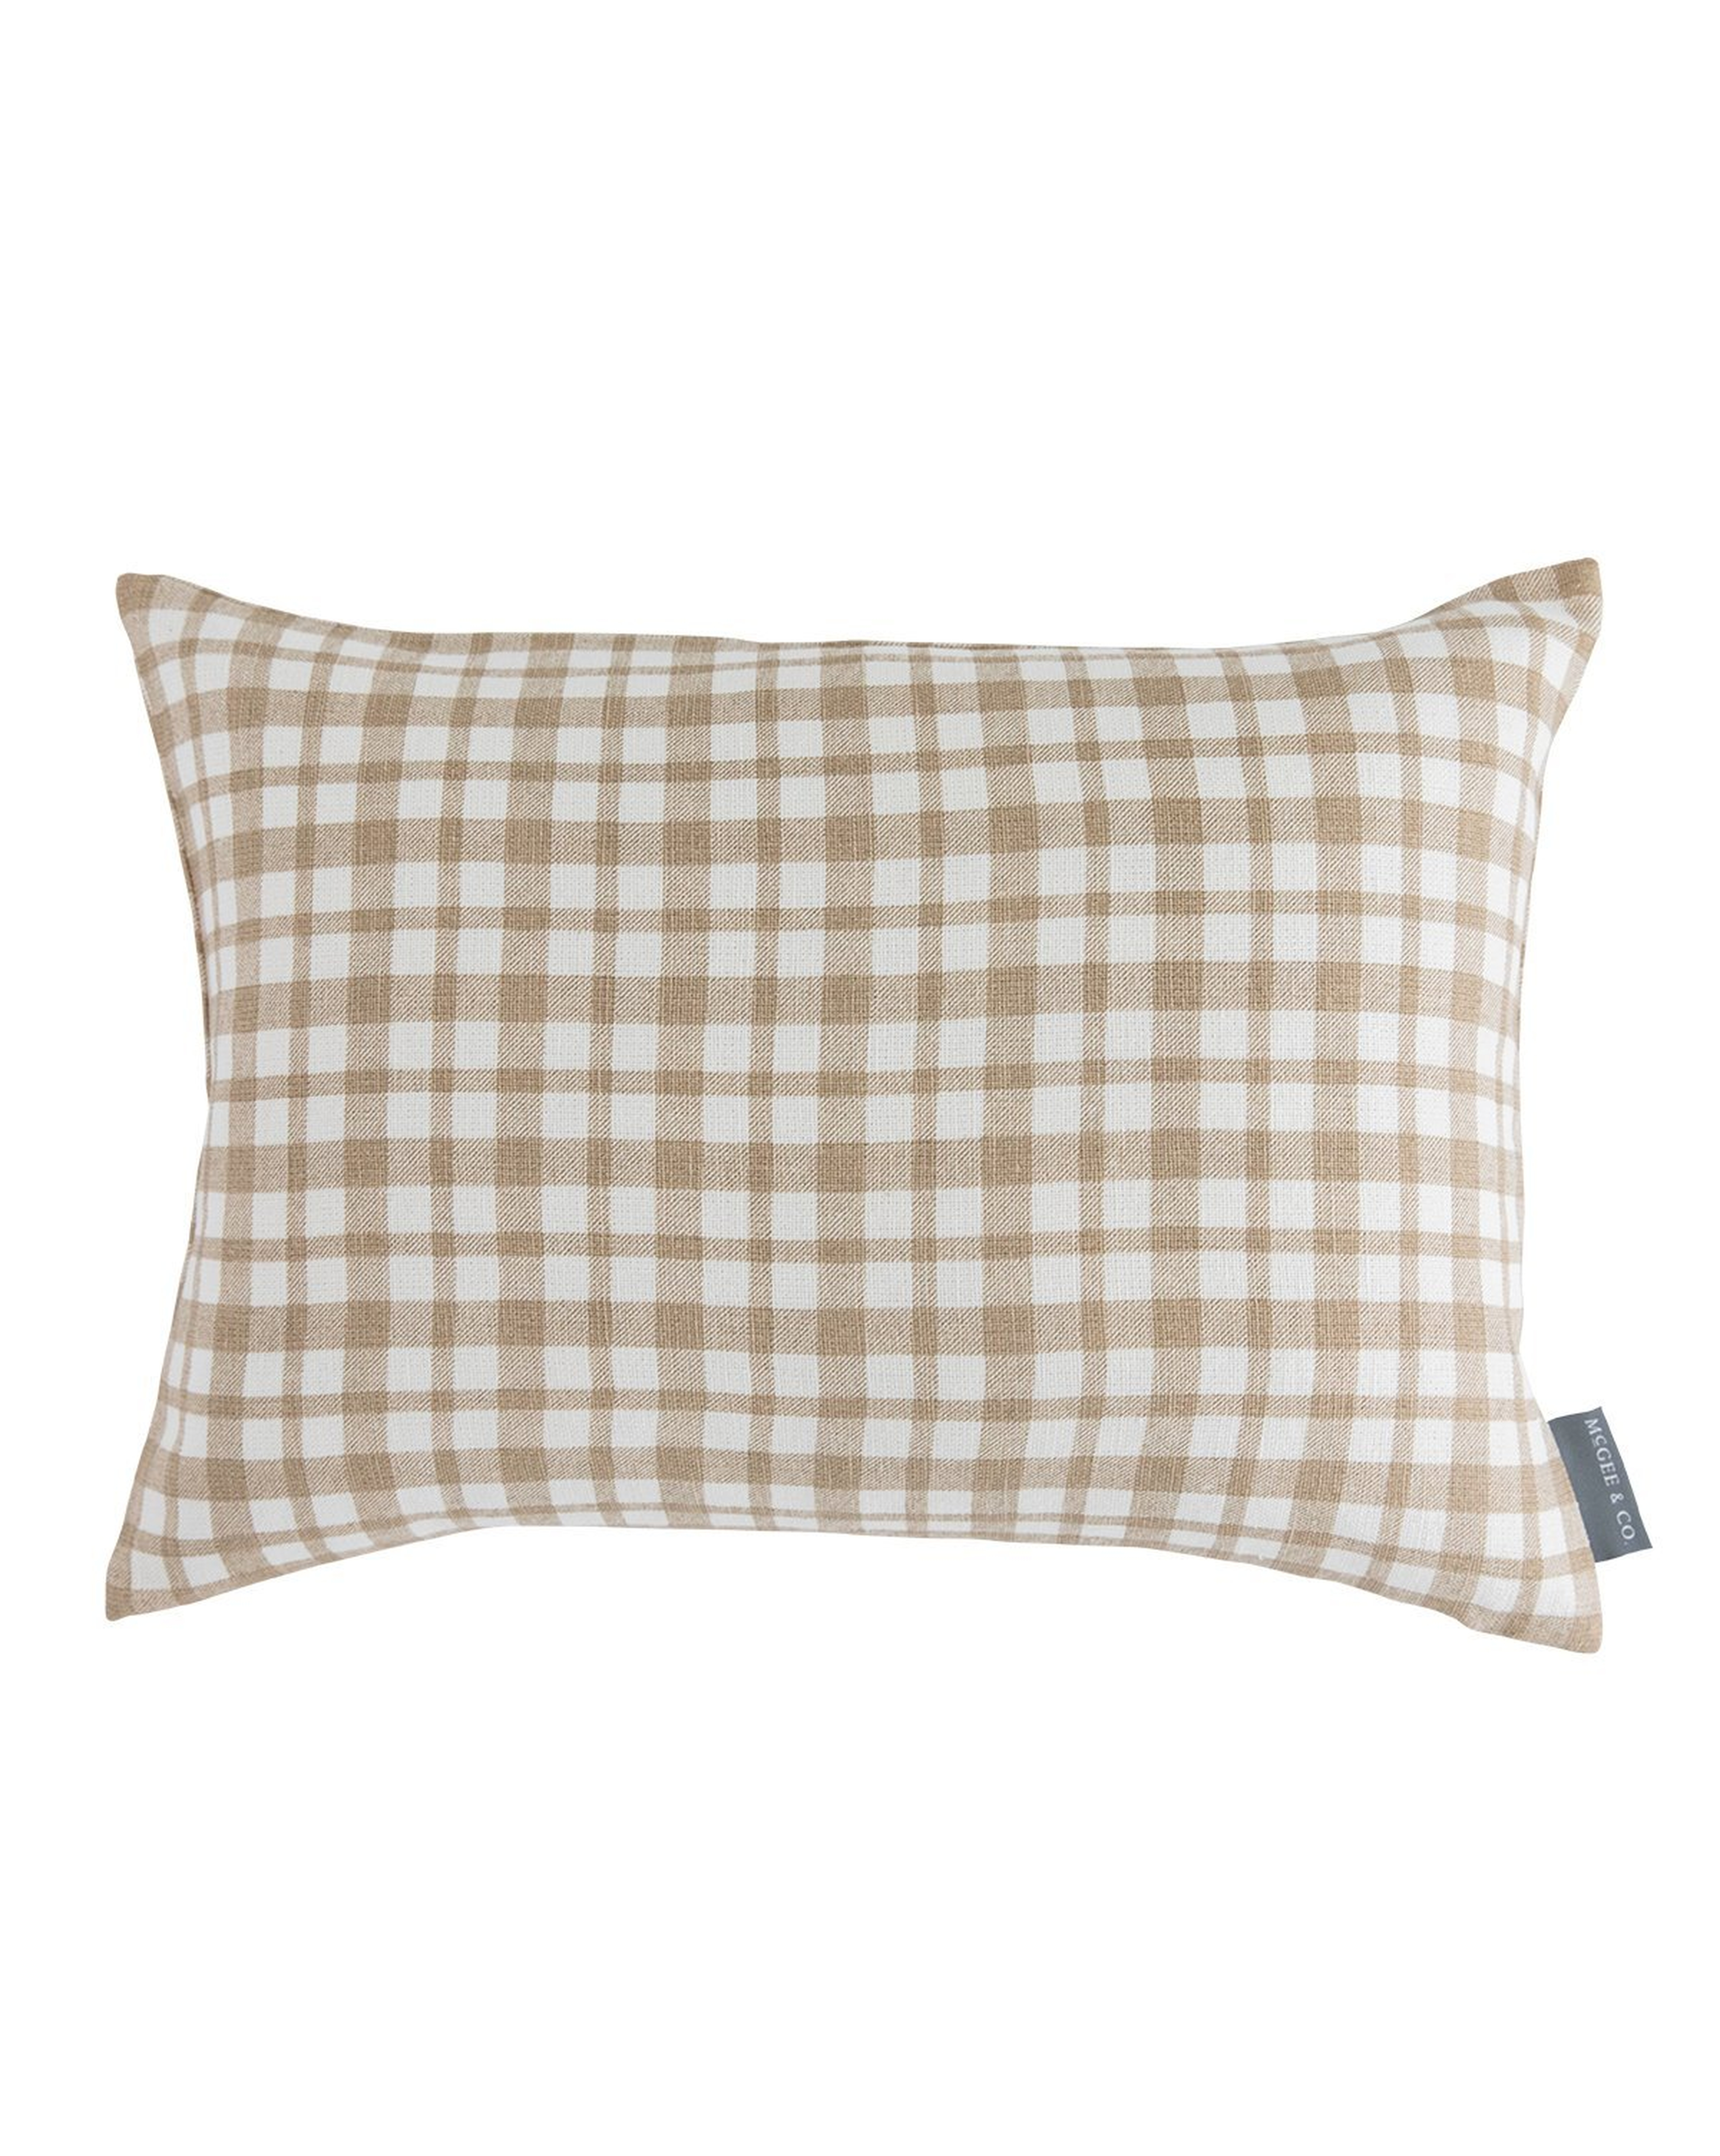 EDISON GINGHAM PILLOW COVER - McGee & Co.